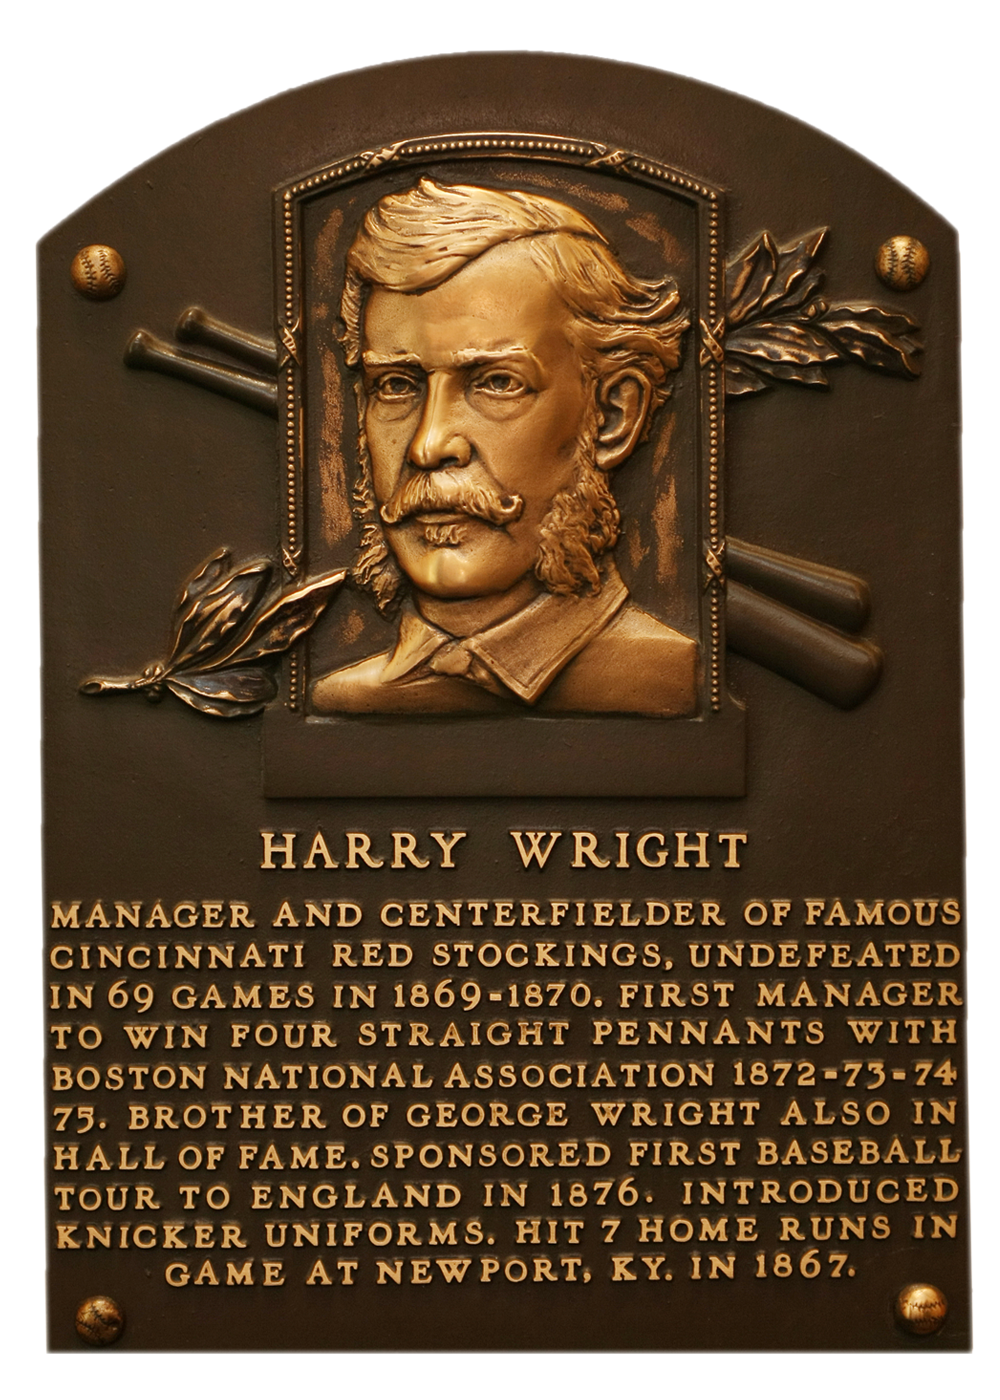 Harry Wright Hall of Fame plaque